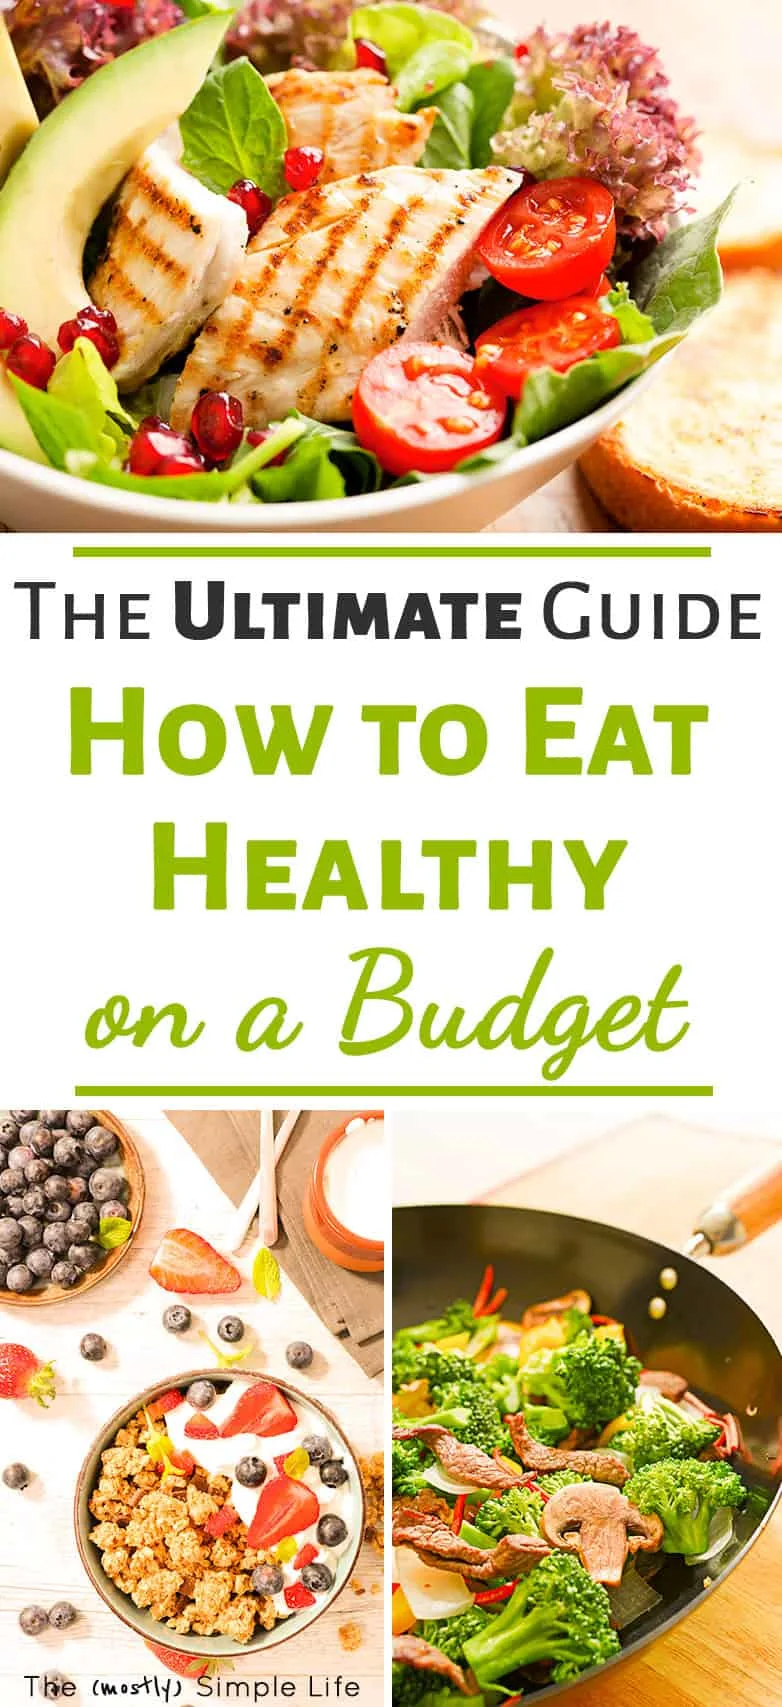 How to Eat Healthy on a Budget: The Ultimate Guide